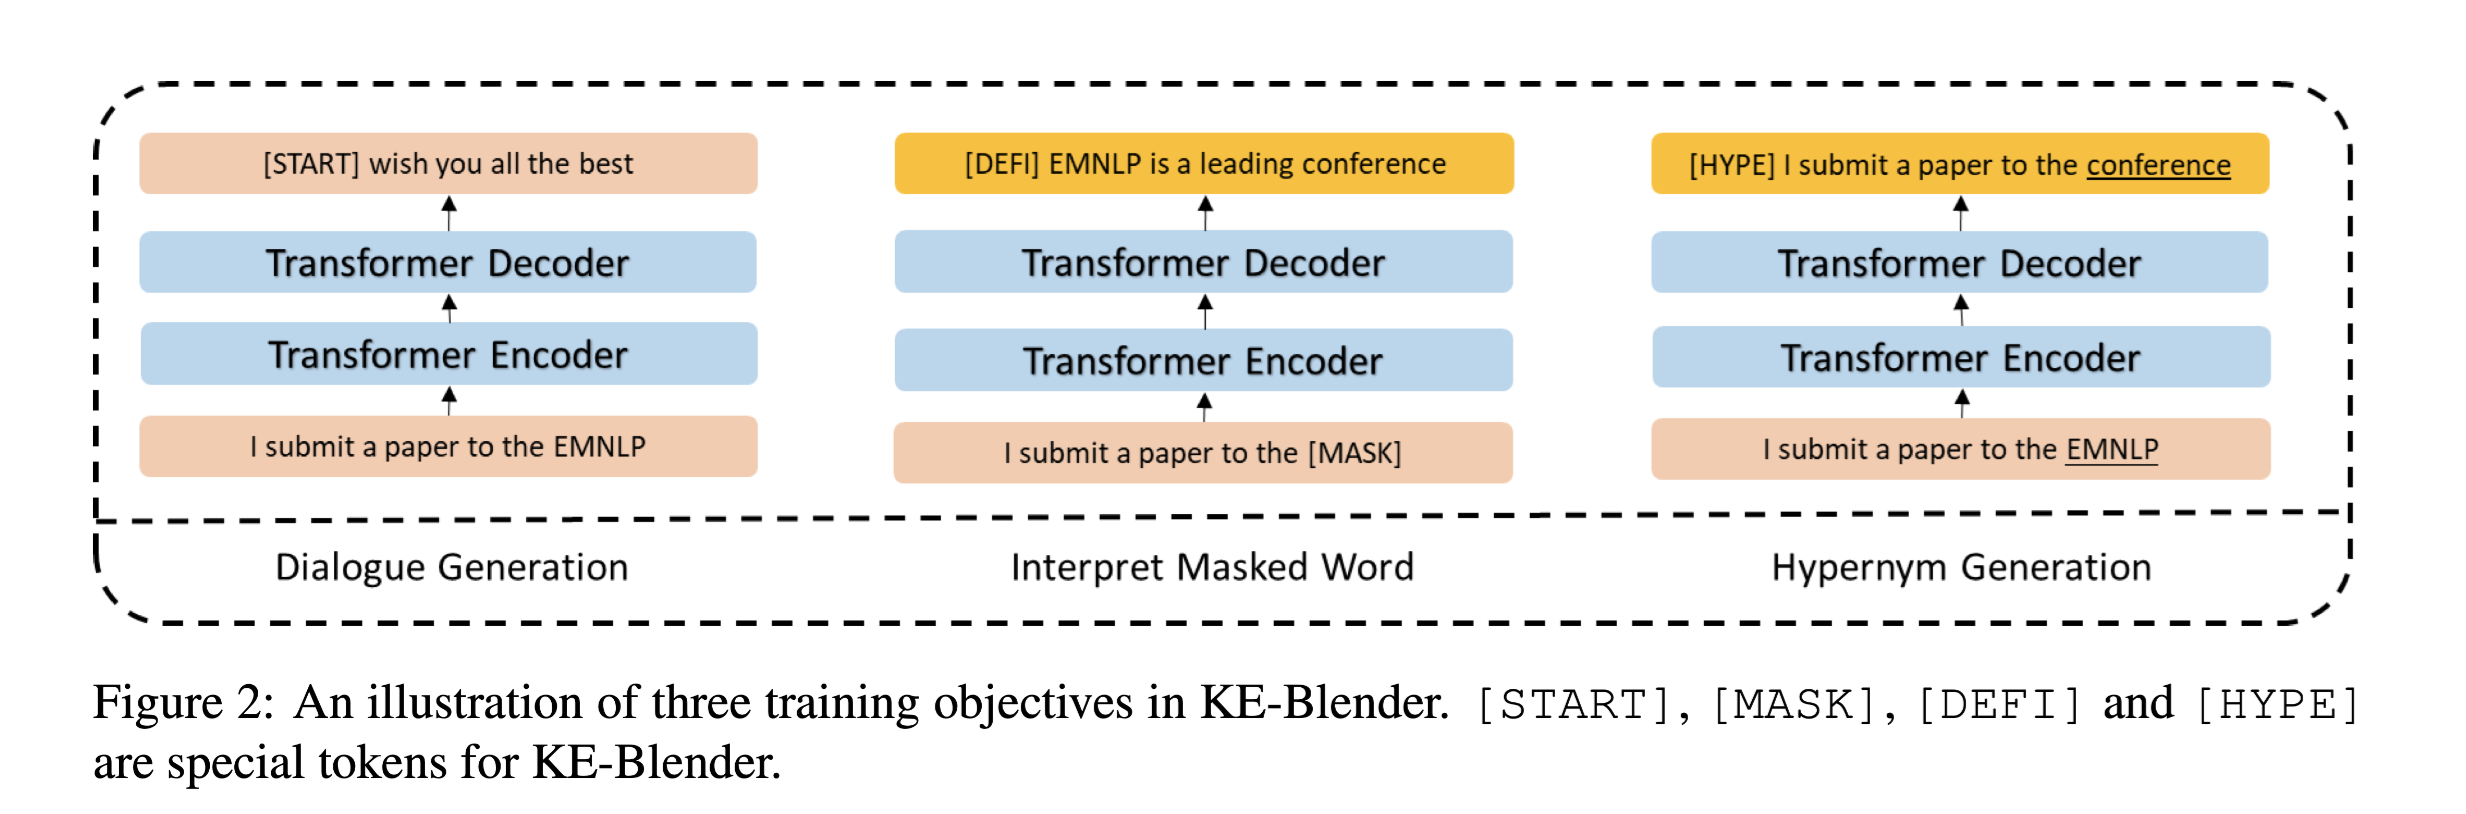 Knowledge Enhanced Fine-Tuning for Better Handling Unseen Entities in Dialogue Generation